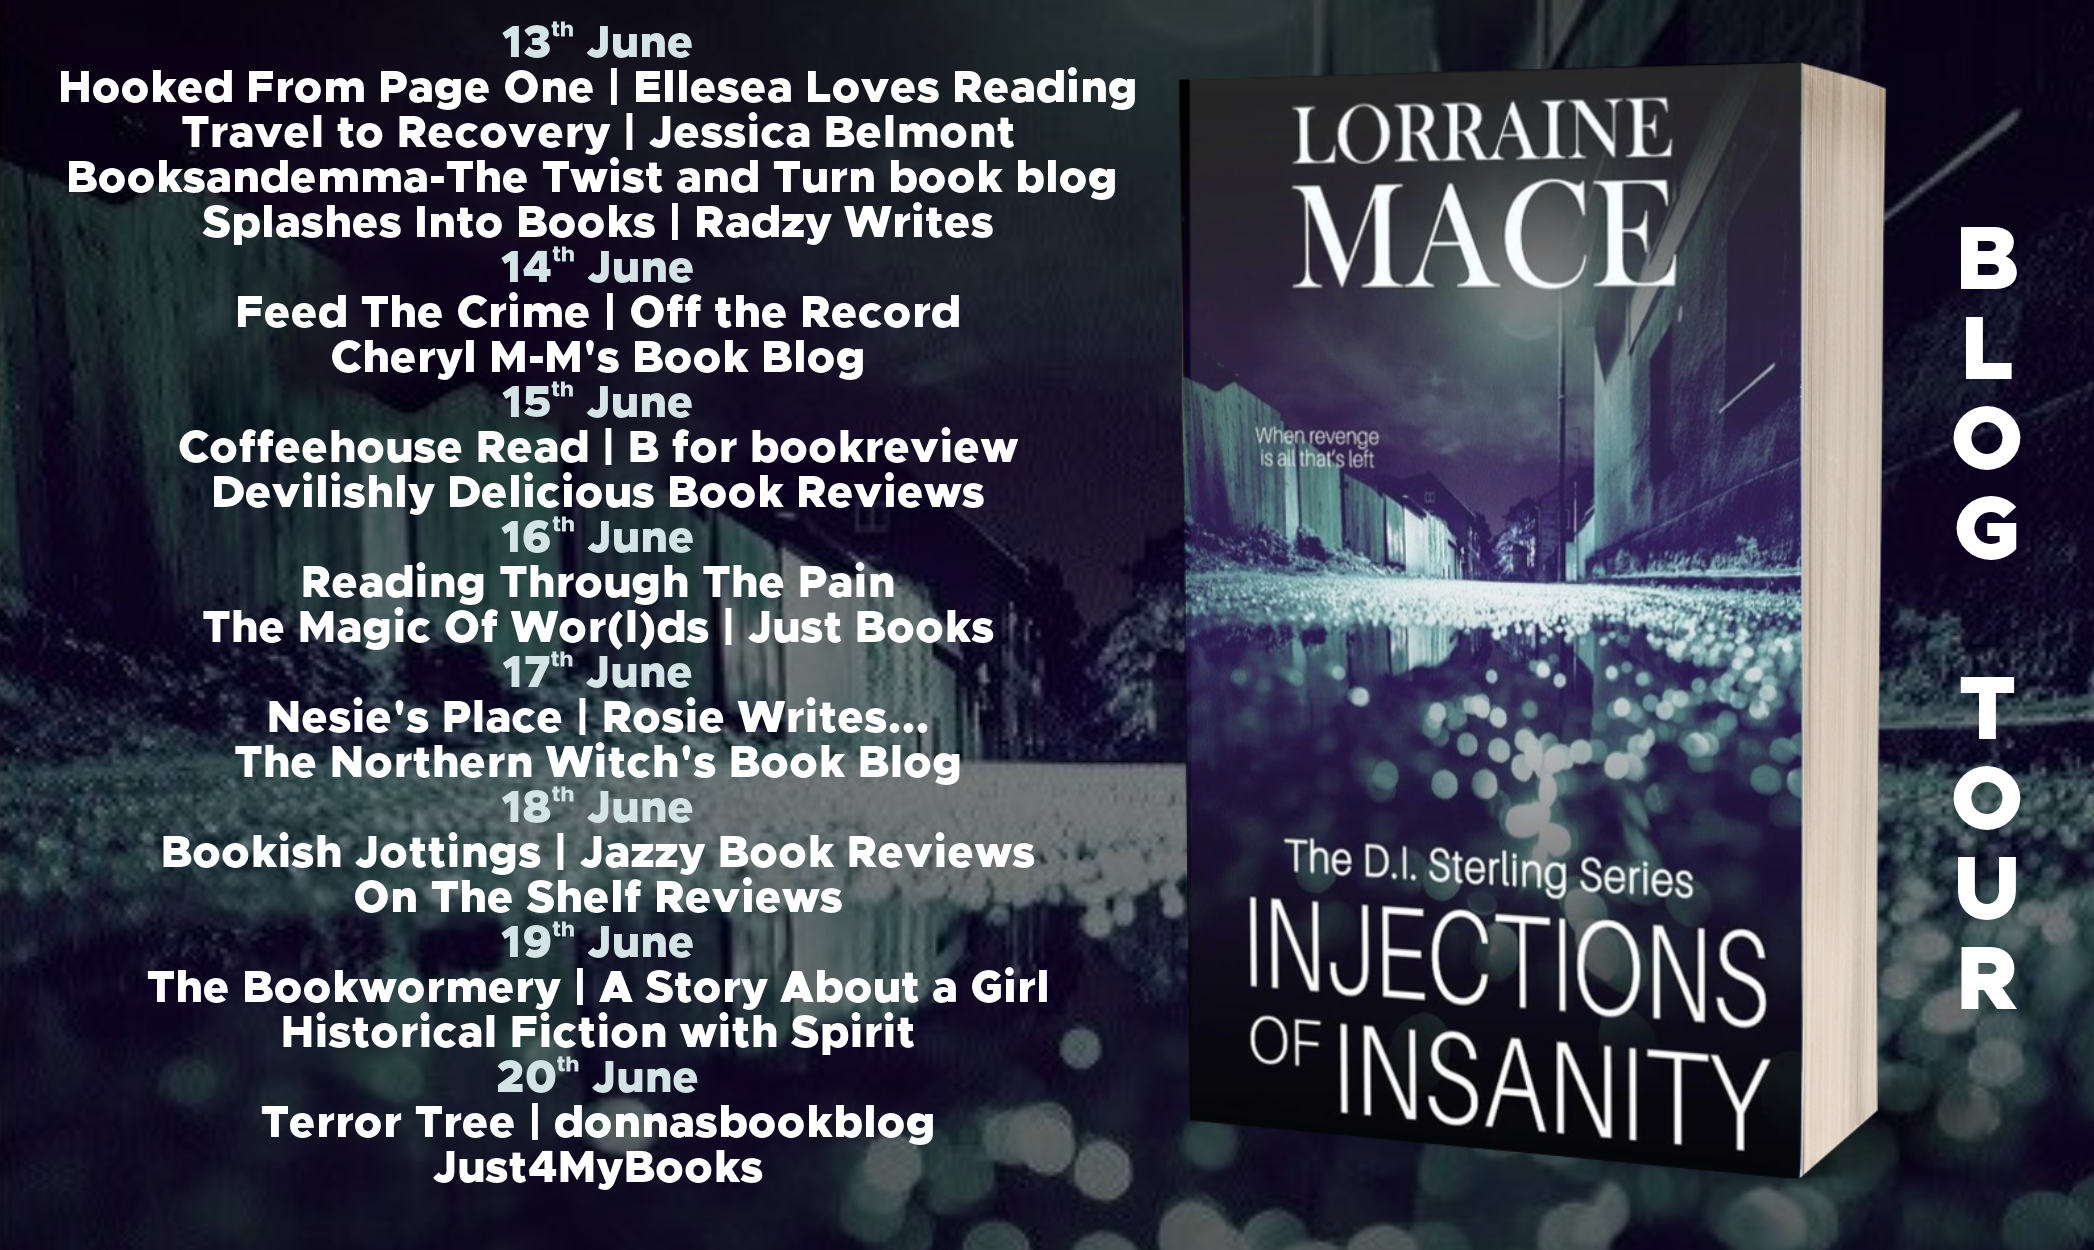 Injections of Insanity Full Tour Banner